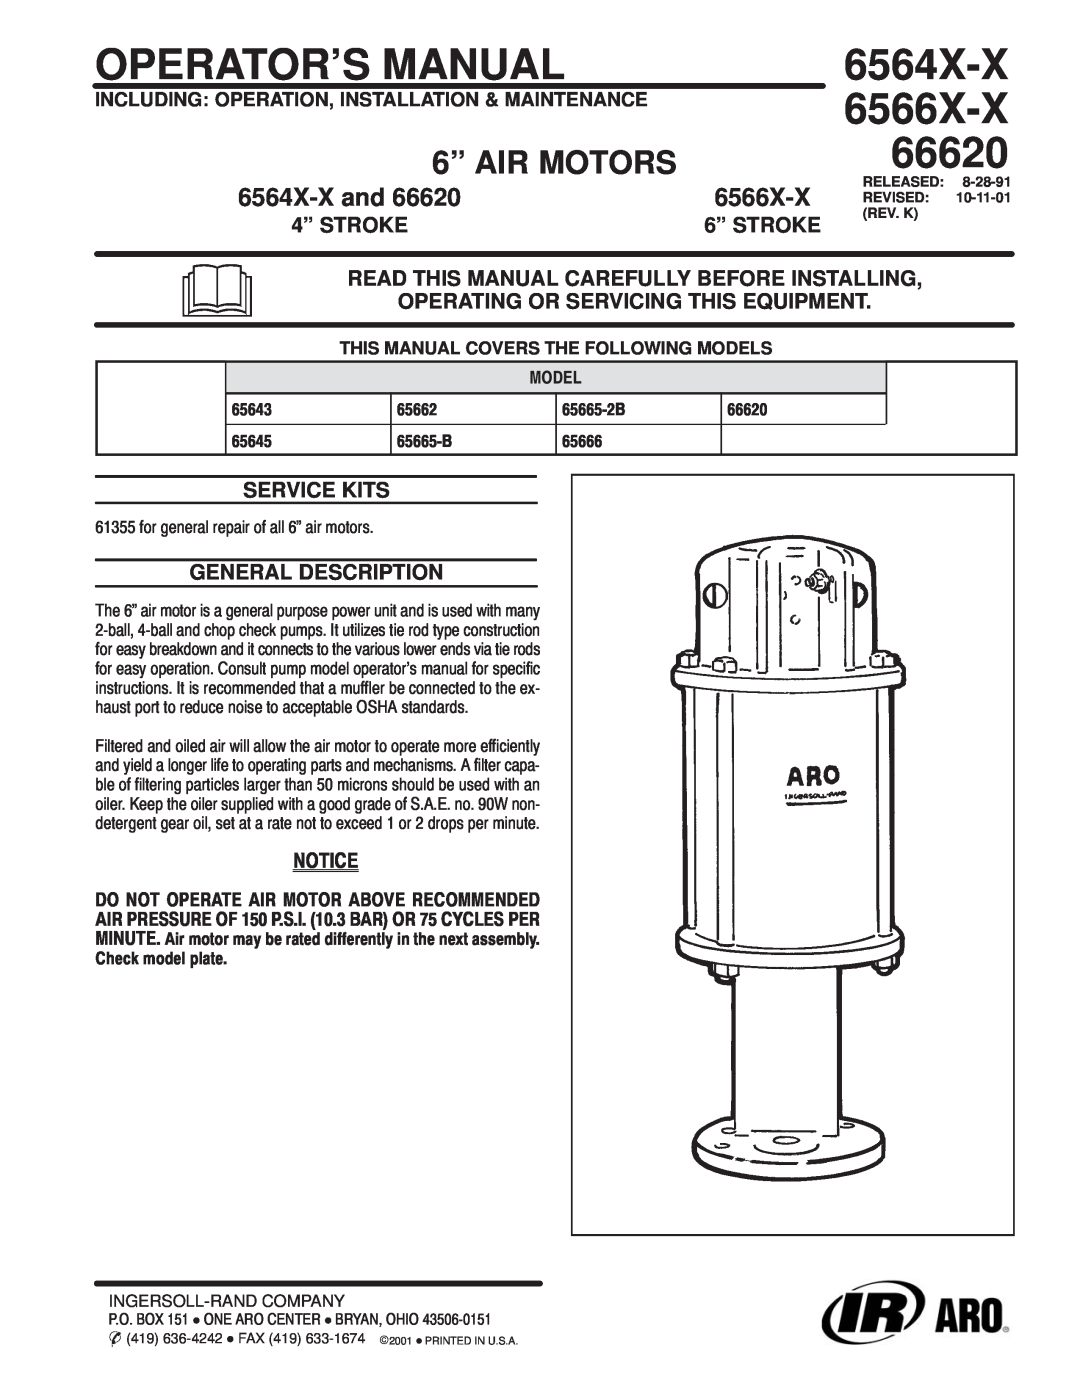 Ingersoll-Rand 65665B manual Read This Manual Carefully Before Installing, Operating Or Servicing This Equipment, 6564X-X 